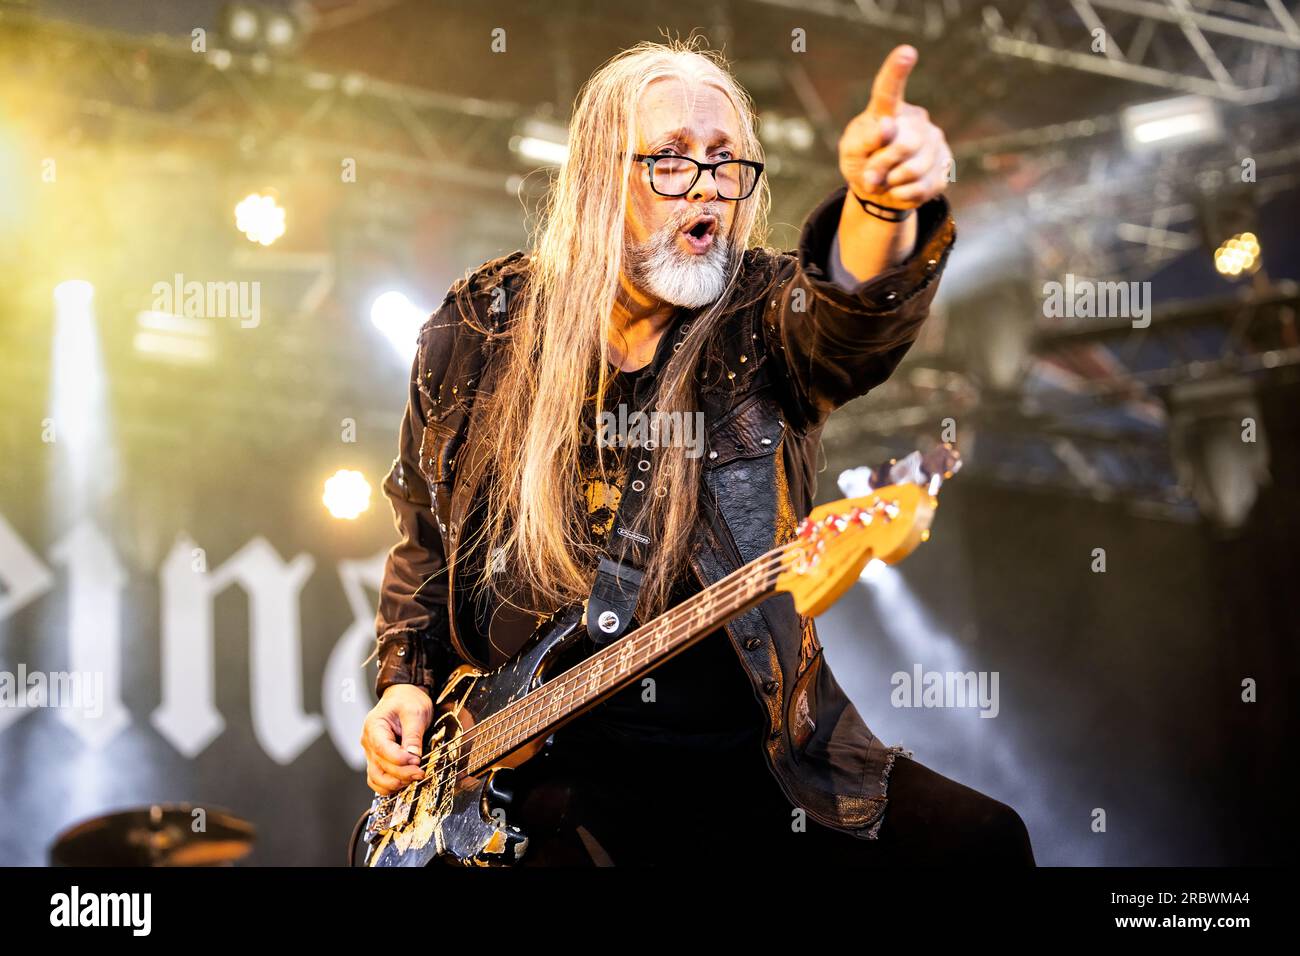 Oslo, Norway. 24th, June 2023. The Swedish doom metal band Candlemass performs a live concert during the Norwegian music festival Tons of Rock 2023 in Oslo. Here bass player Leif Edling is seen live on stage. (Photo credit: Gonzales Photo - Terje Dokken). Stock Photo